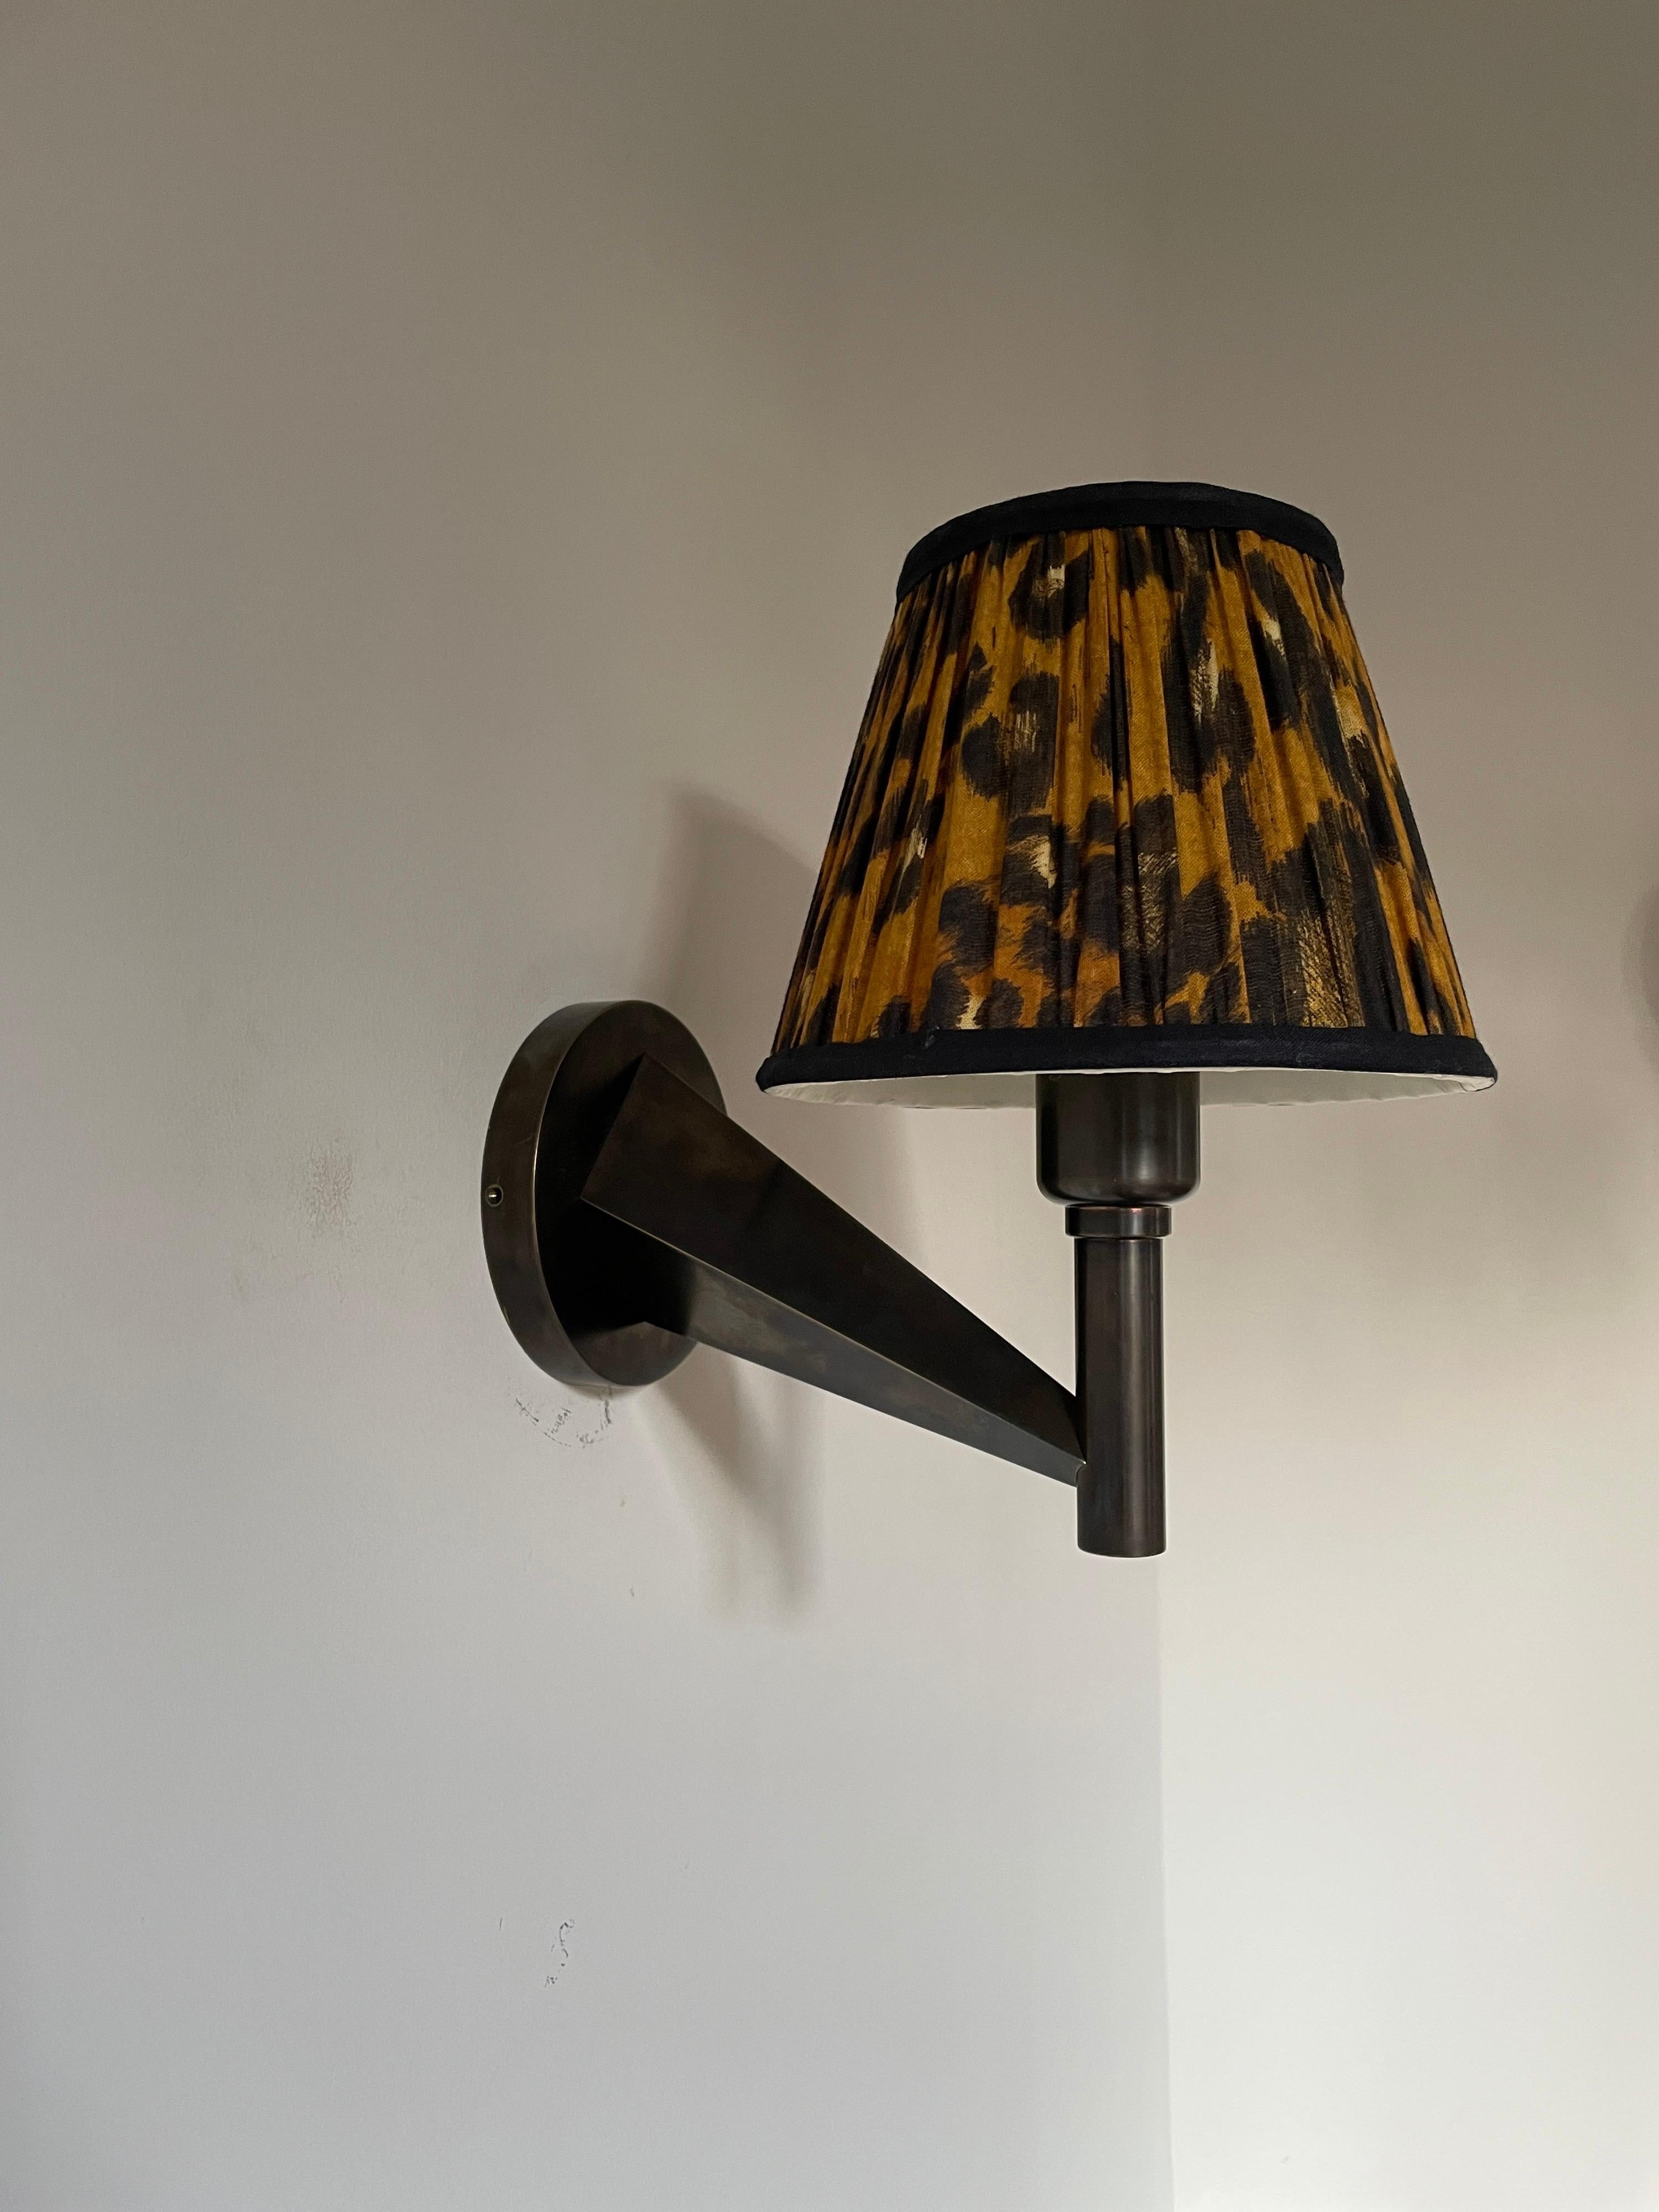 From our Studio Bucchi Collection, these hand made in the UK sconces are available in different finishes. We have used a leopard print shade which is included with these lights. The lamps are solid brass and with a bronze patinated finish. The